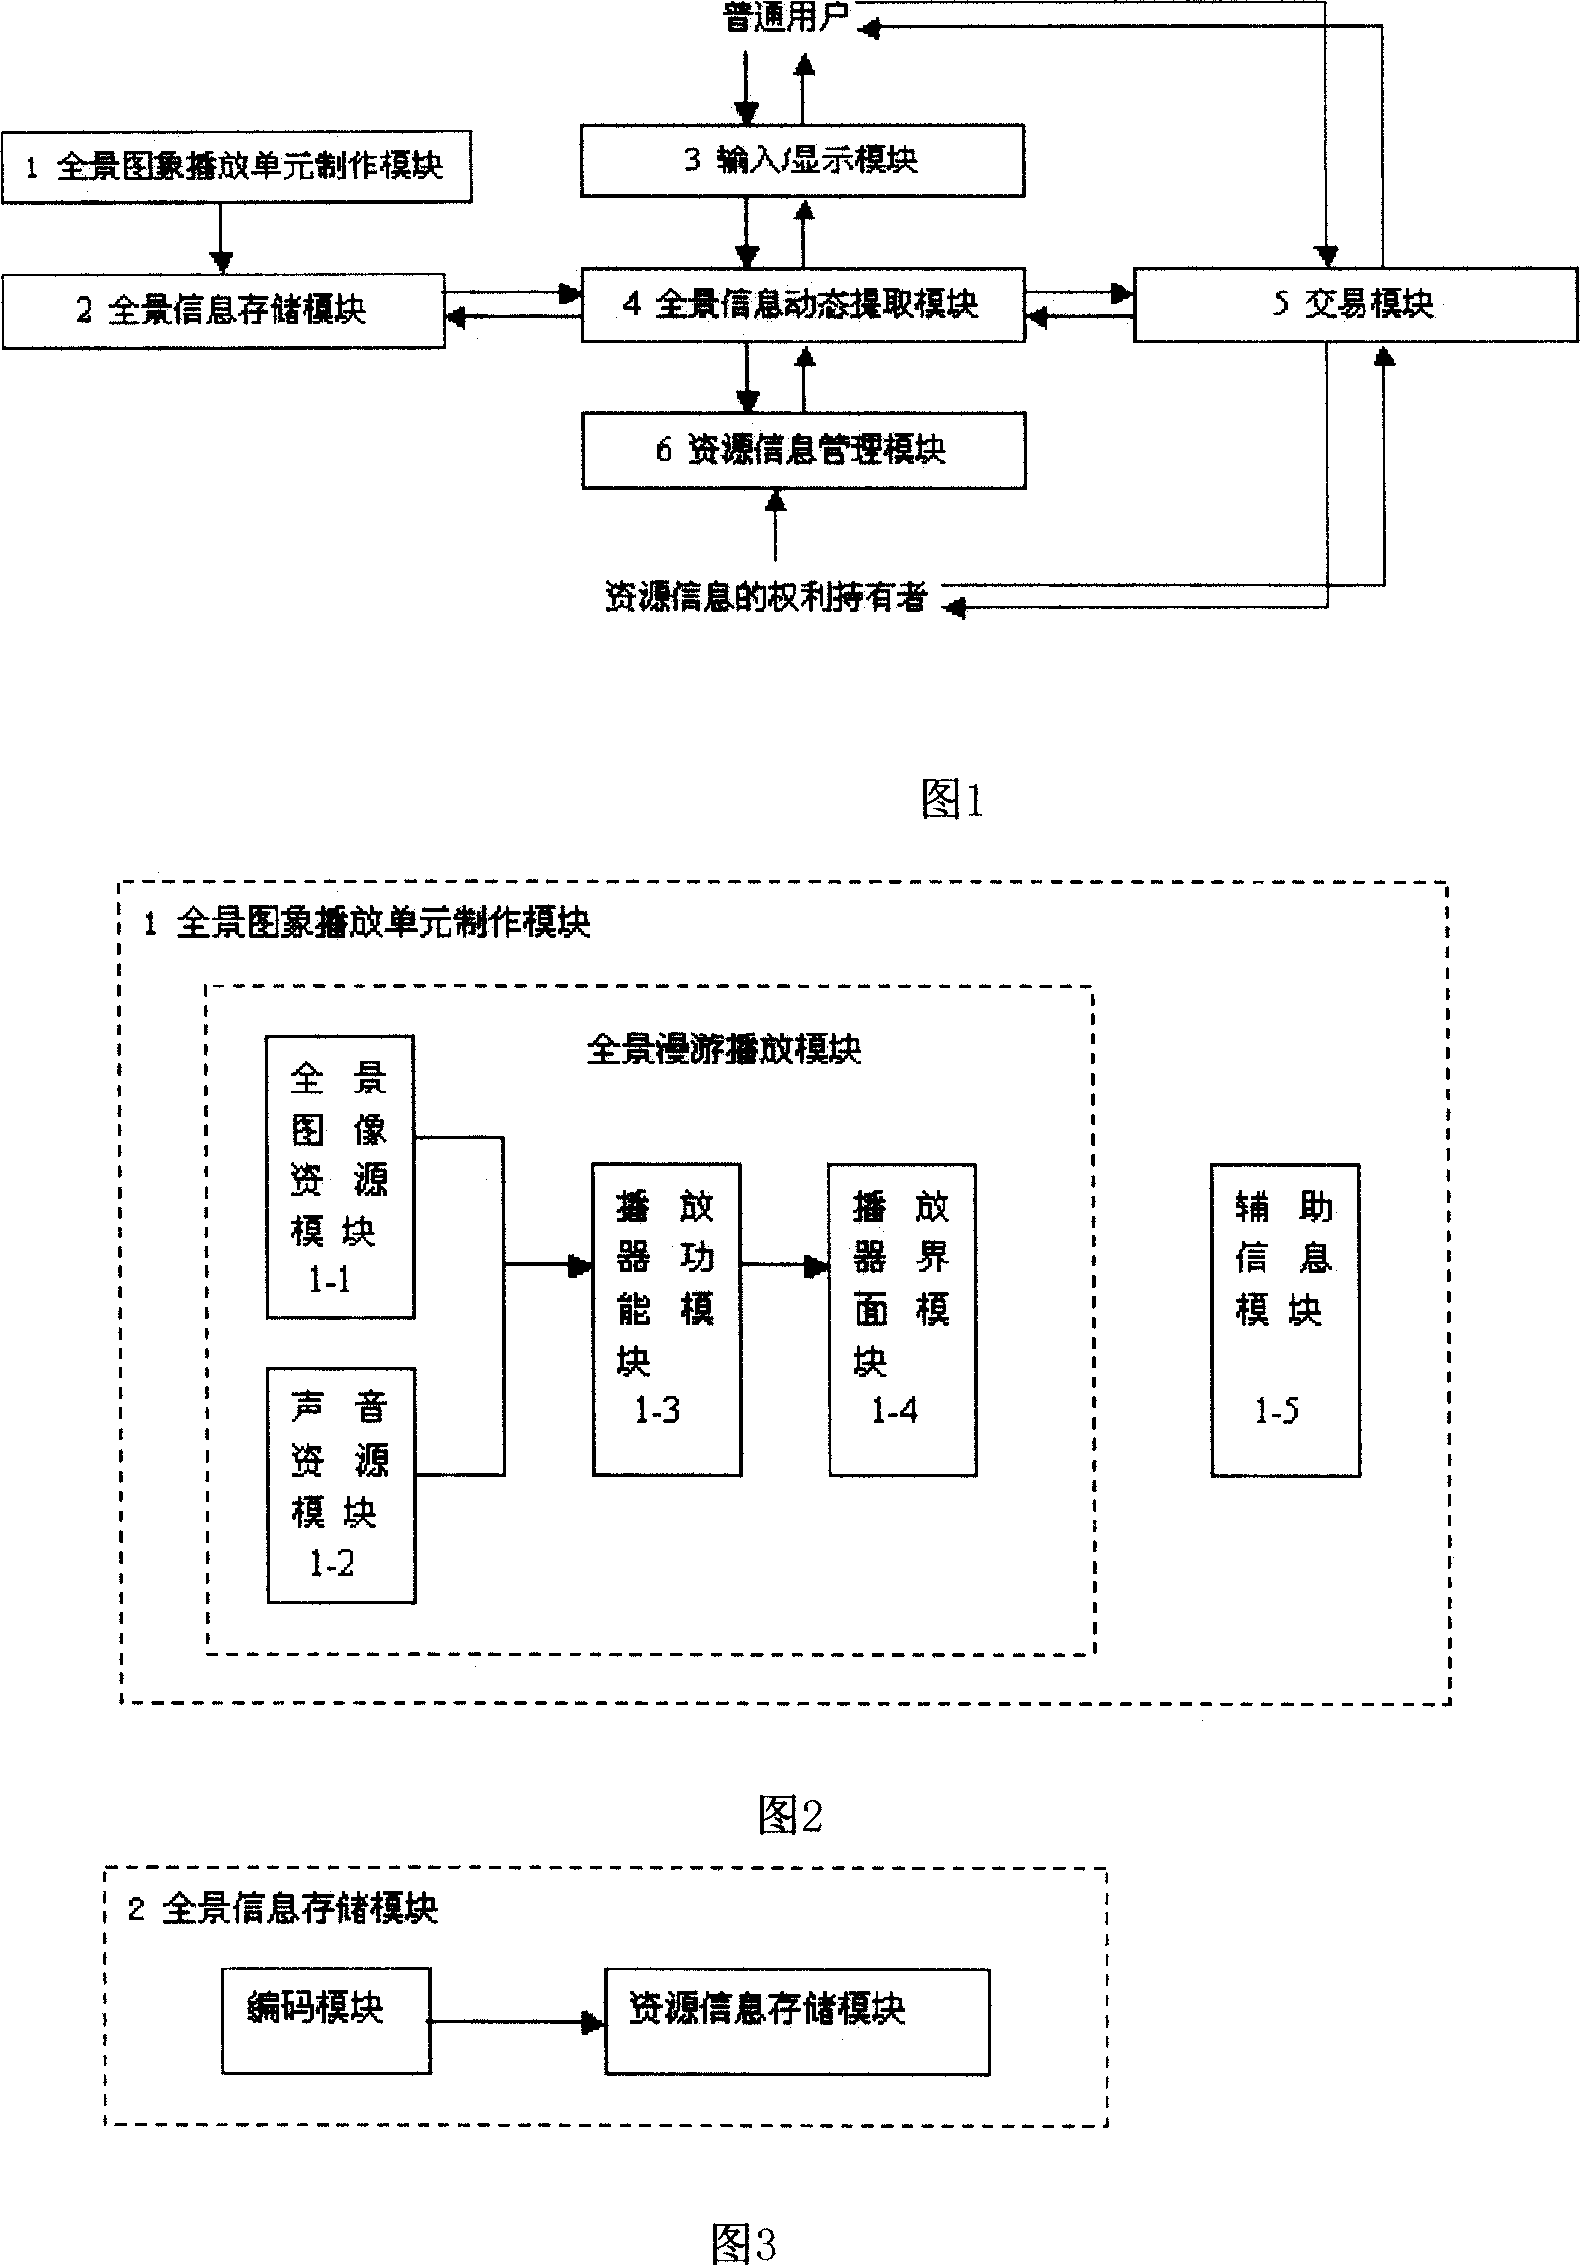 Panorama manufacturing and displaying system of resource information